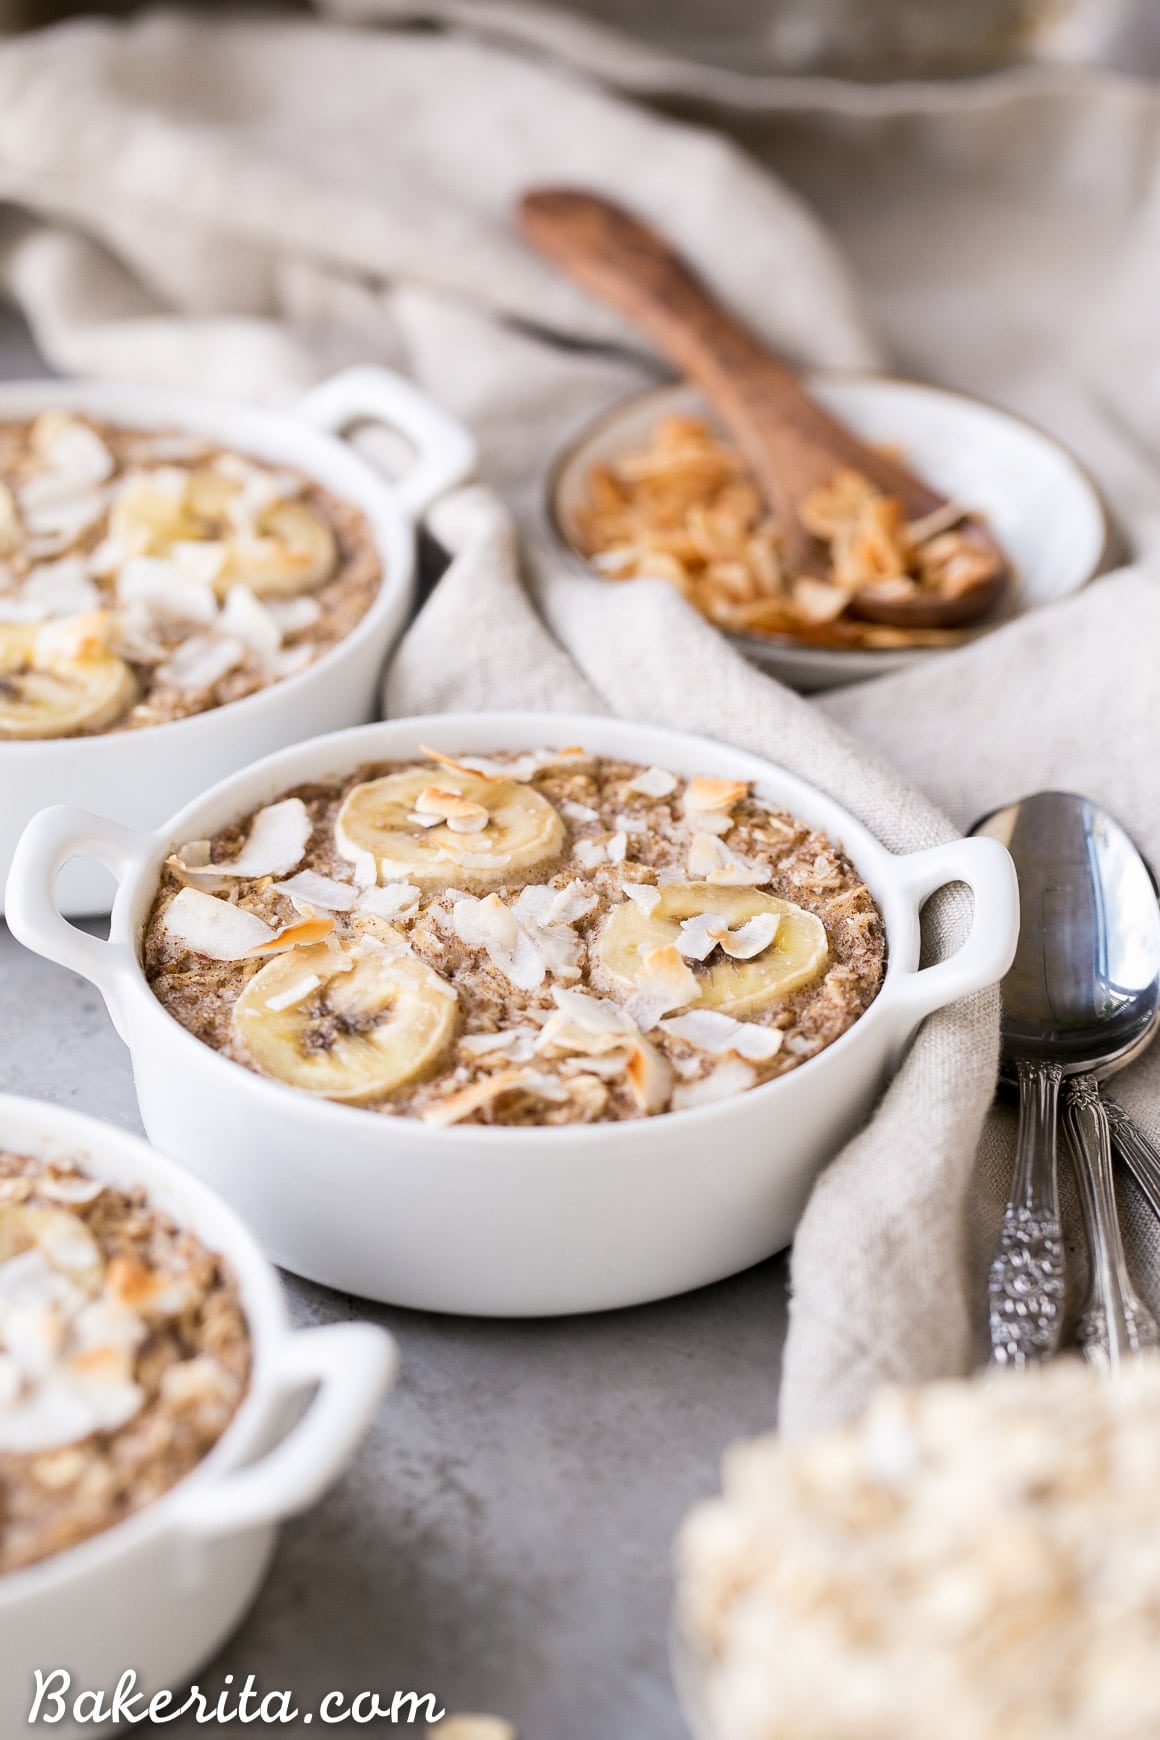 This Banana Coconut Baked Oatmeal is packed with fiber and potassium for a healthy, hearty breakfast. This easy recipe is vegan, gluten-free, and sweetened with a ripe banana - no added sugar needed!